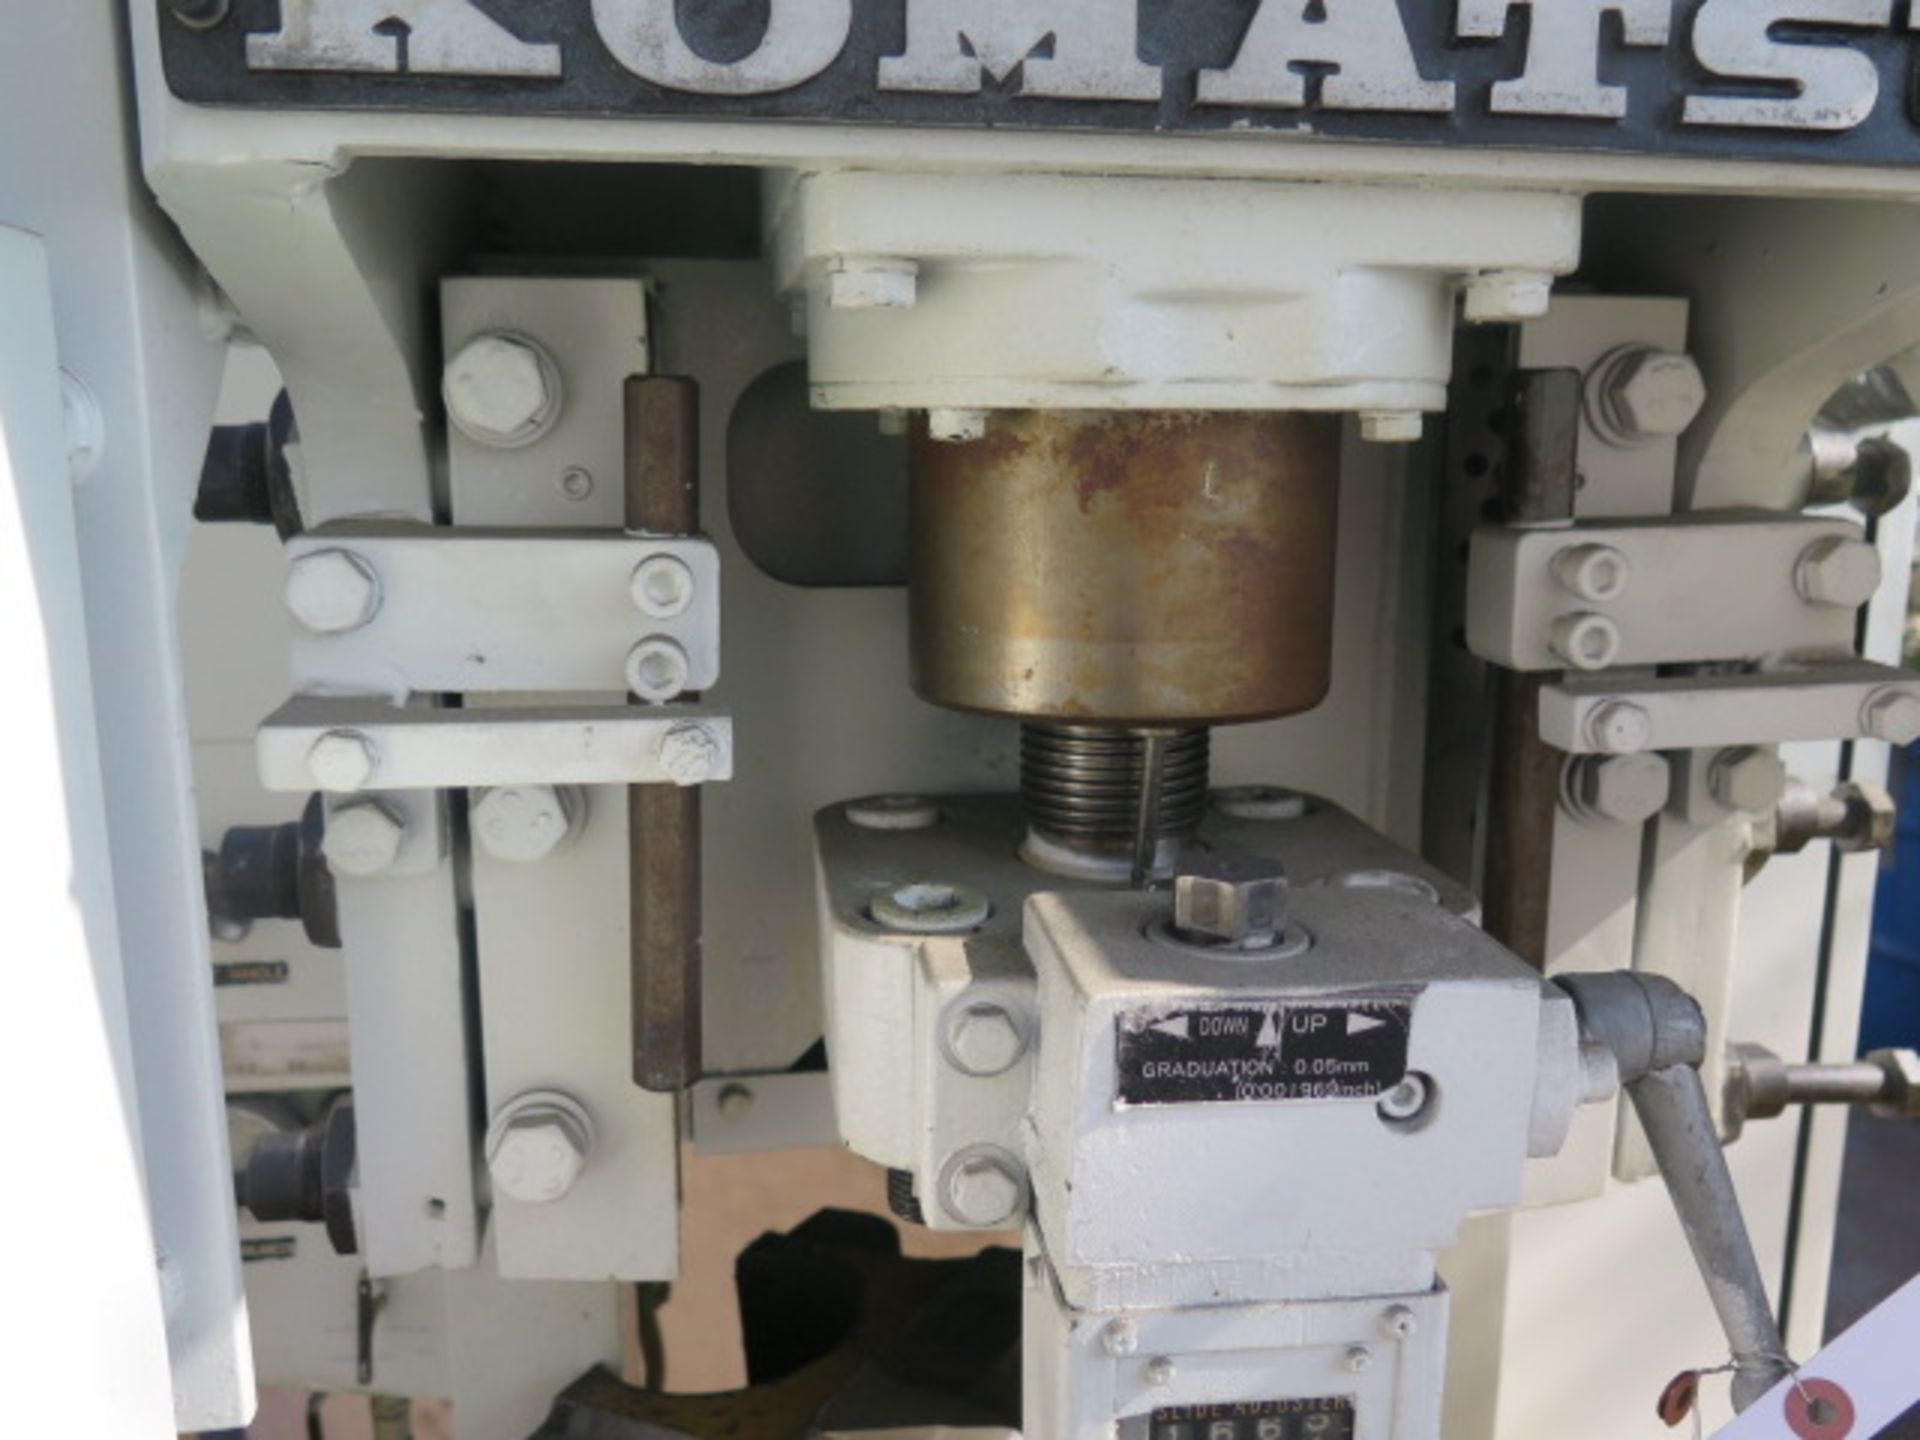 Komatsu OBS25-2 25 Ton Stamping Press (FOR PARTS ONLY - BROKEM RAM) s/n 10676, SOLD AS-IS - NO WARRA - Image 8 of 11